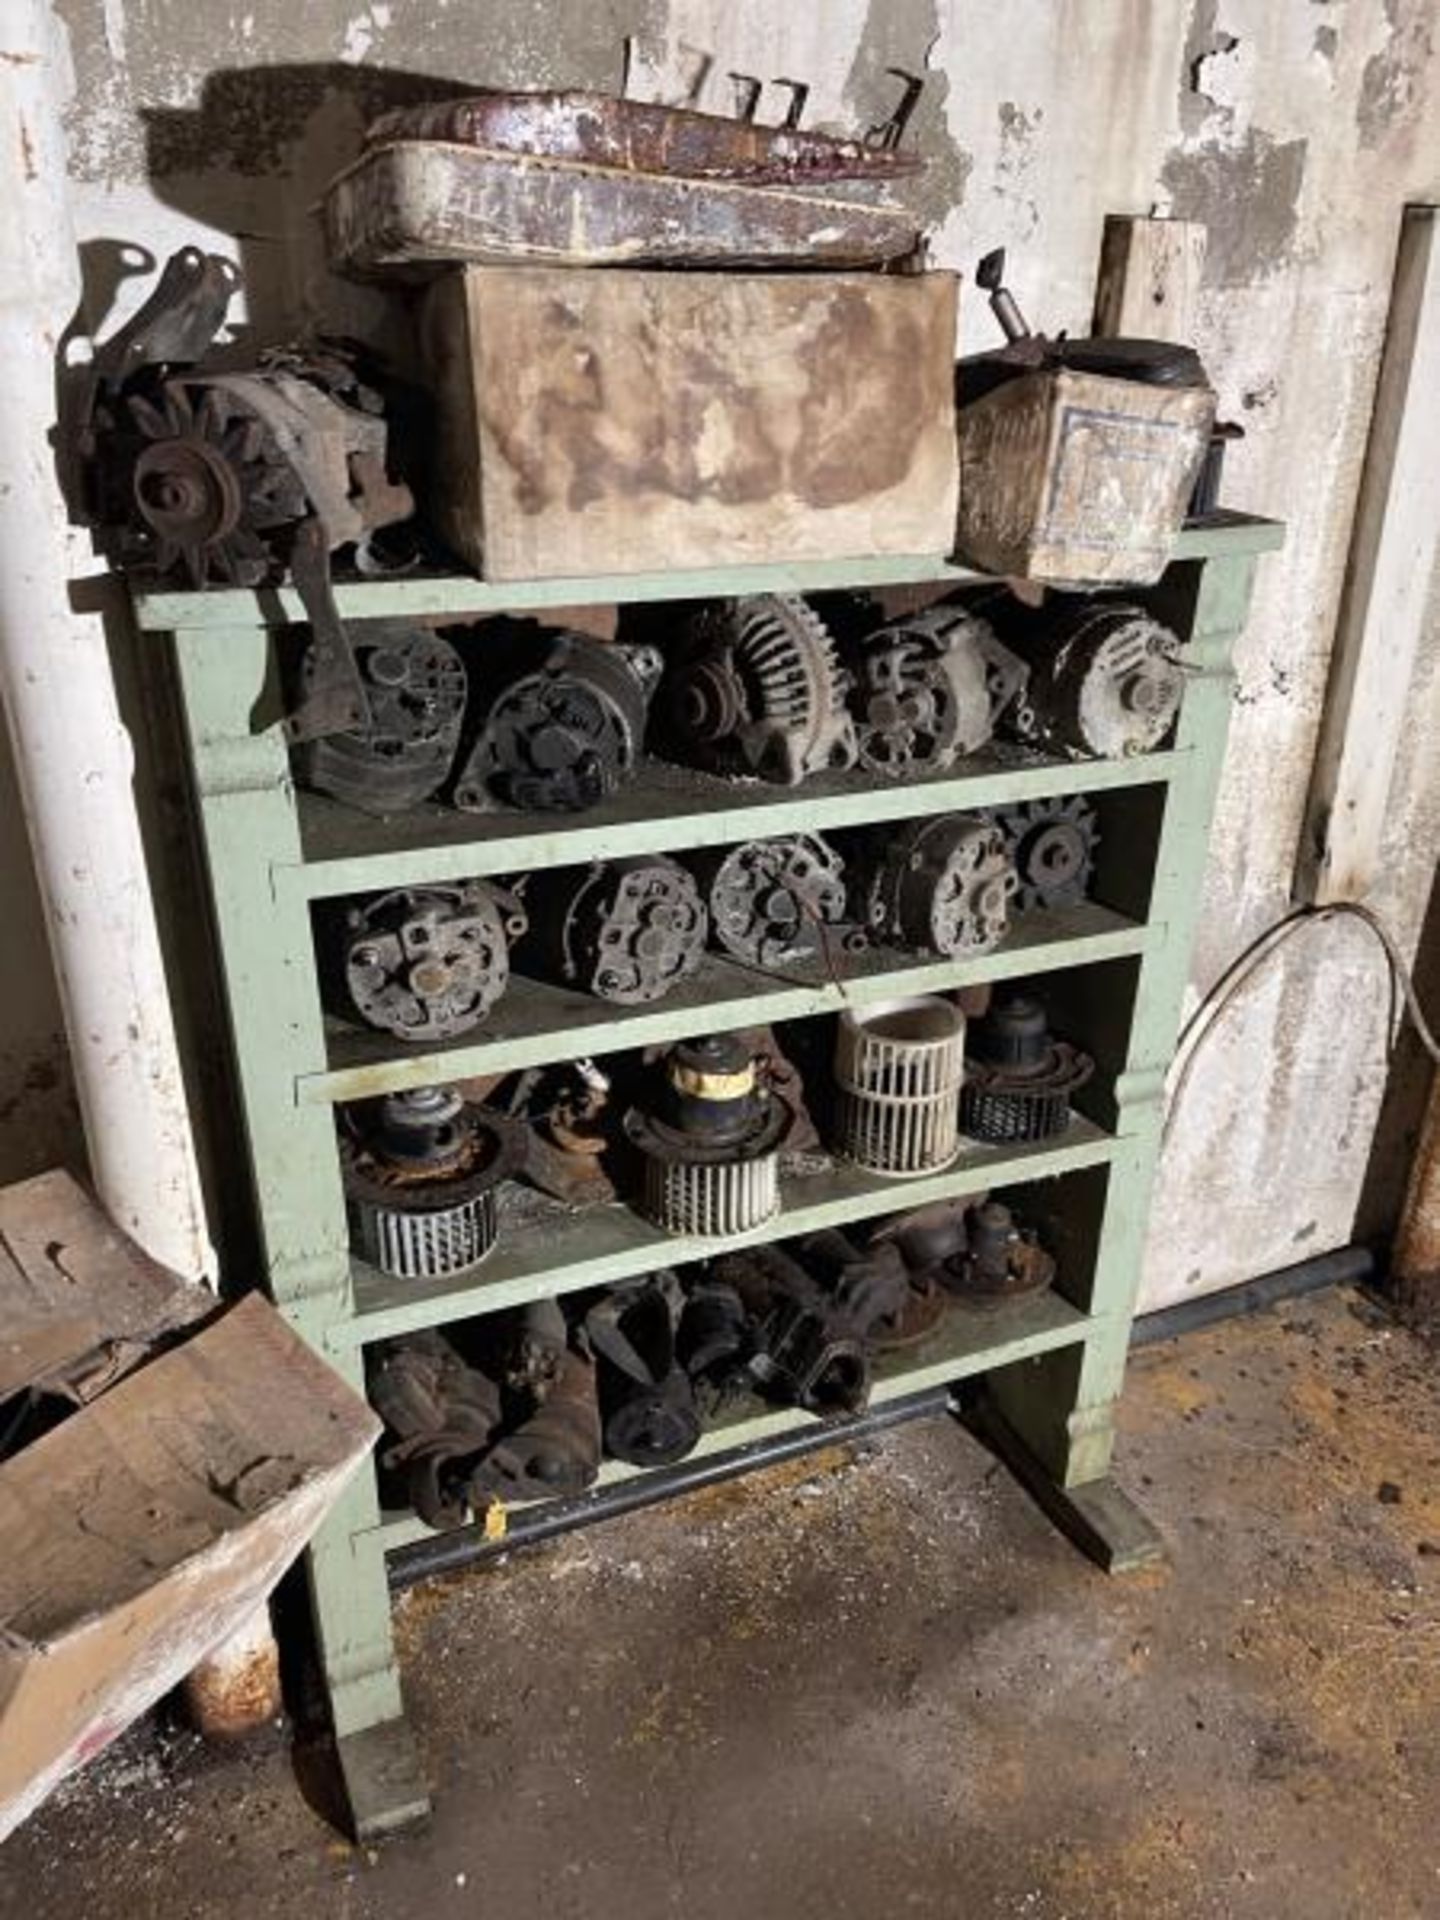 Contents Of Basement: Old Car Parts, Engine Parts, Body Parts, Starters, Alternators, All Must Be - Image 34 of 37